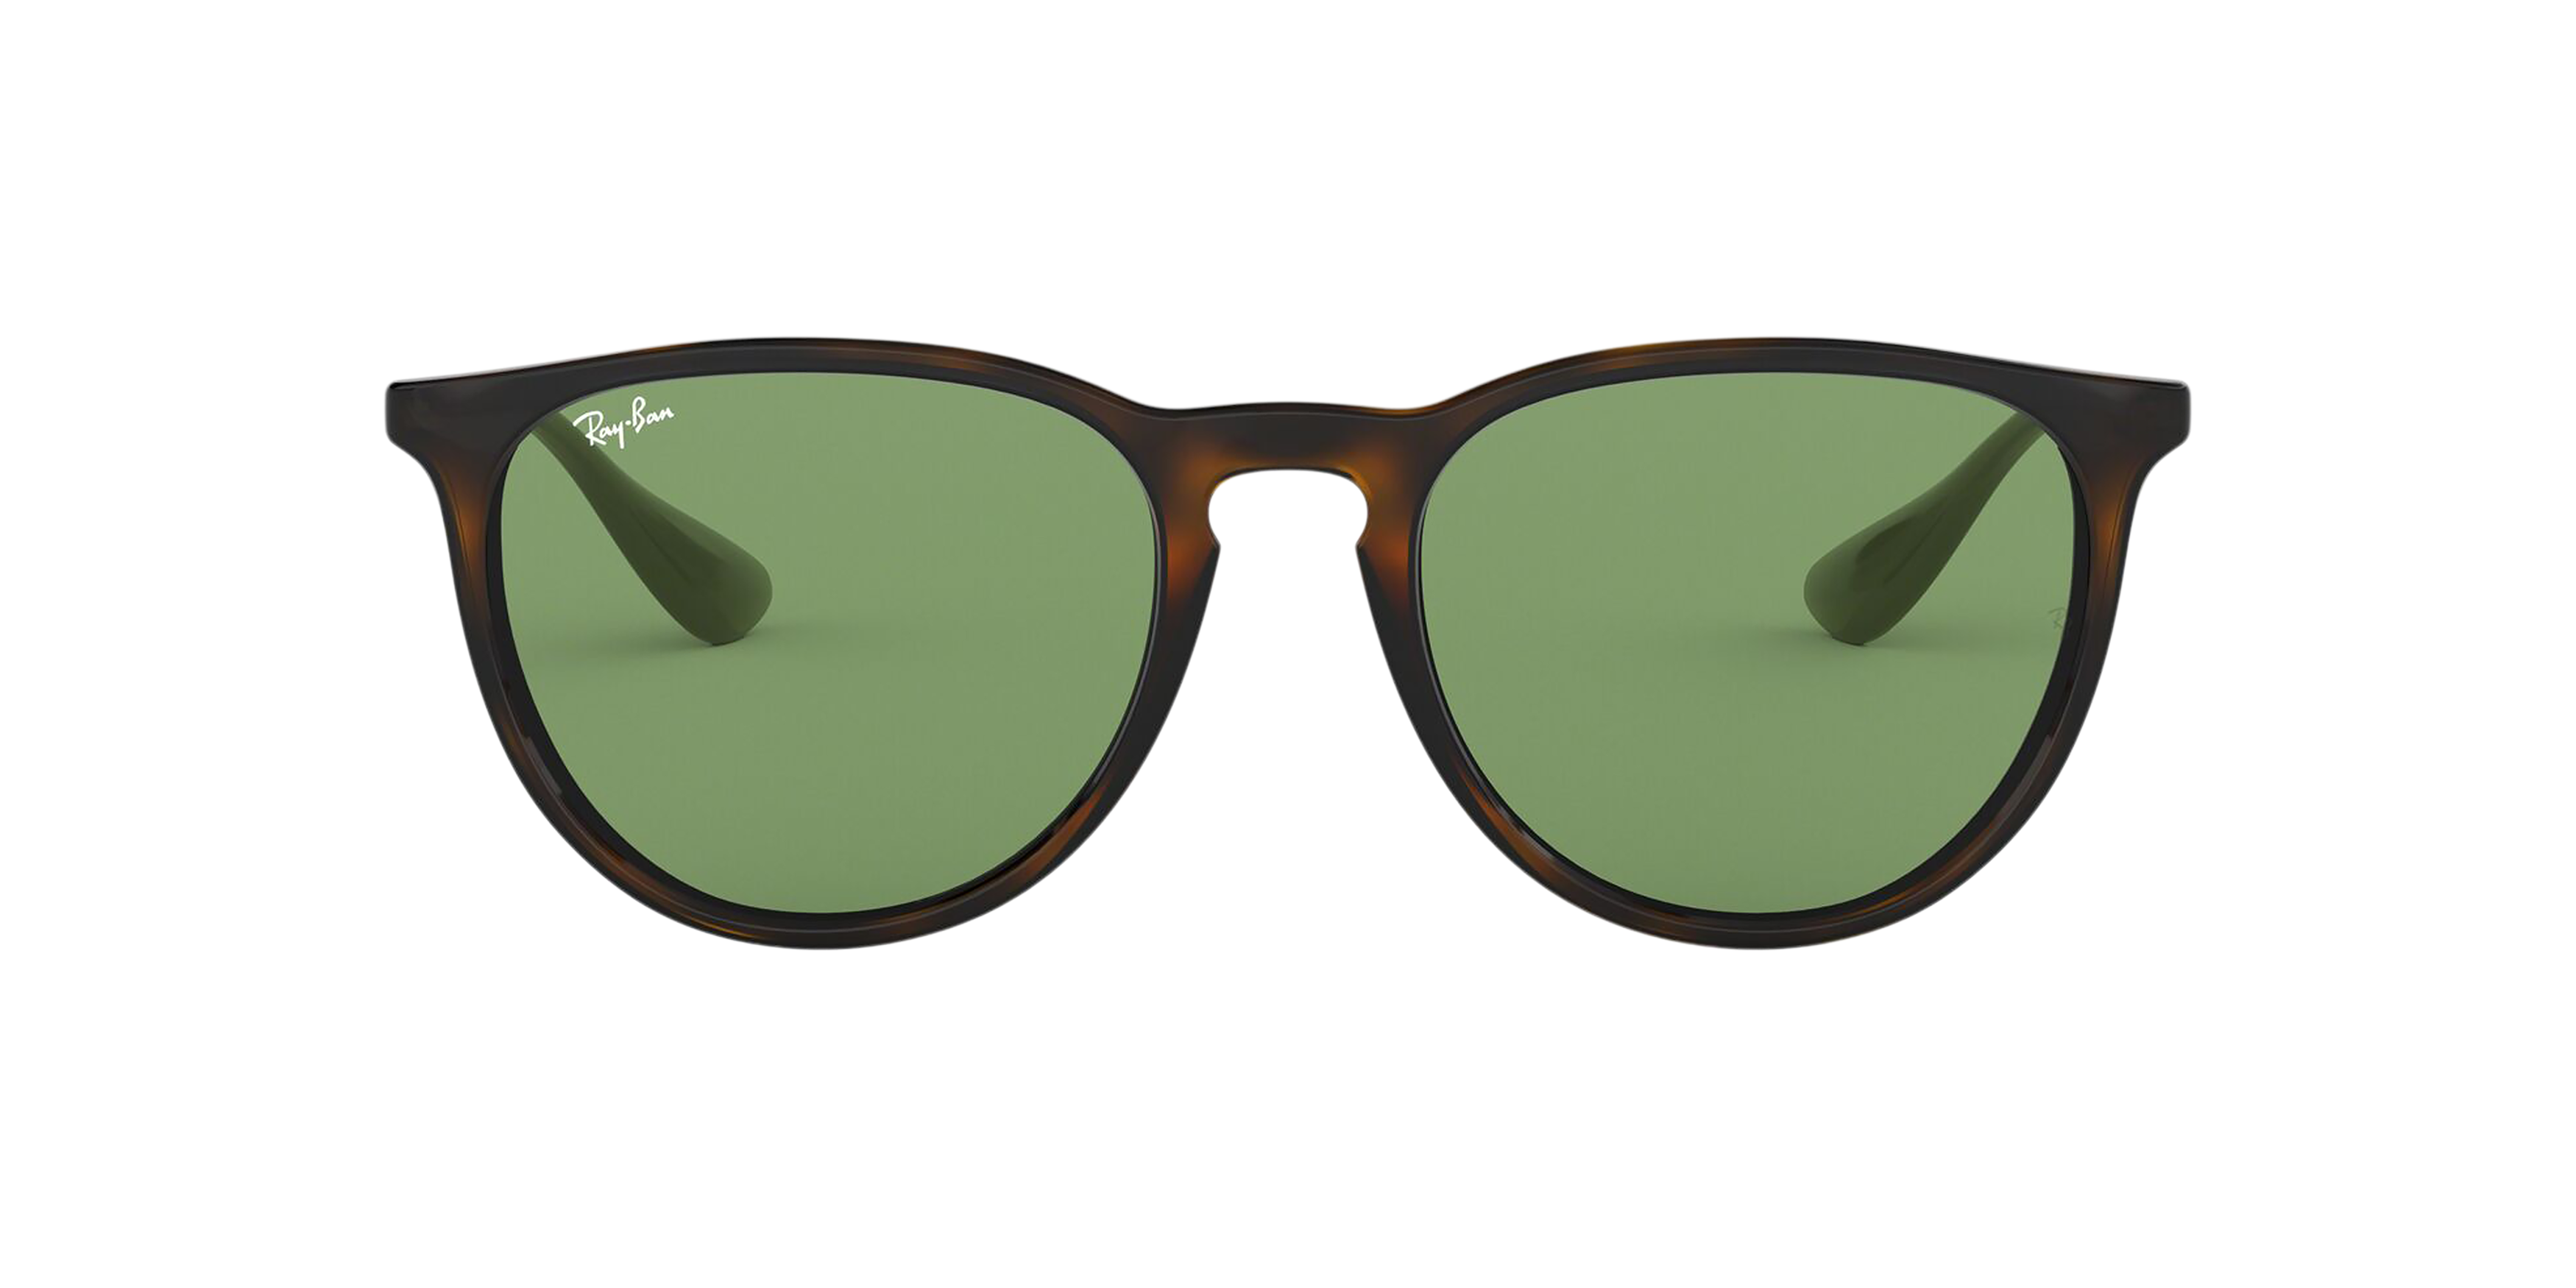 [products.image.front] Ray-Ban Erika Color Mix RB4171 6393/2